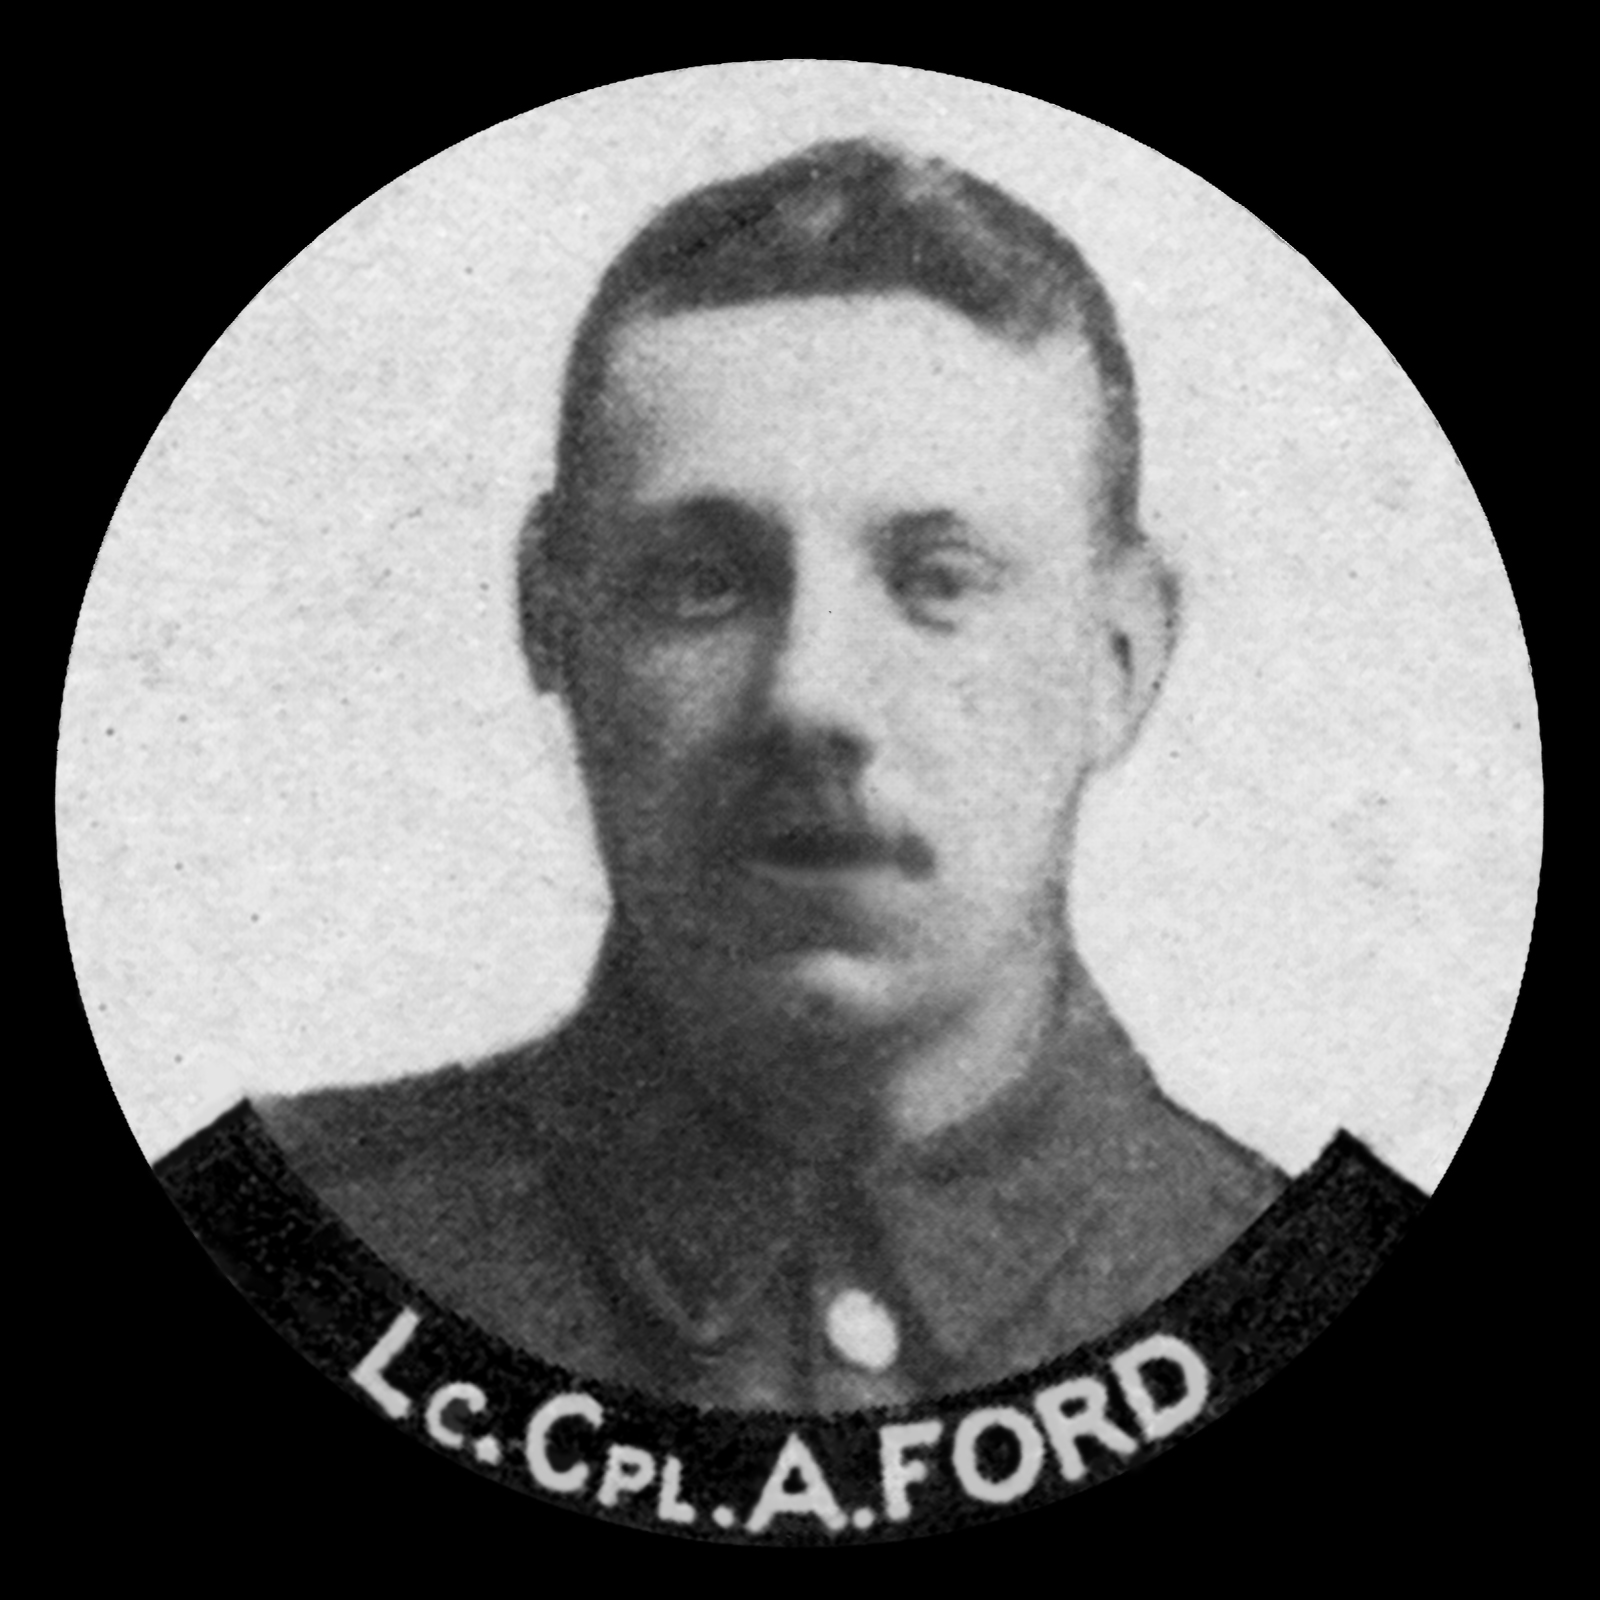 Lance corporal ford